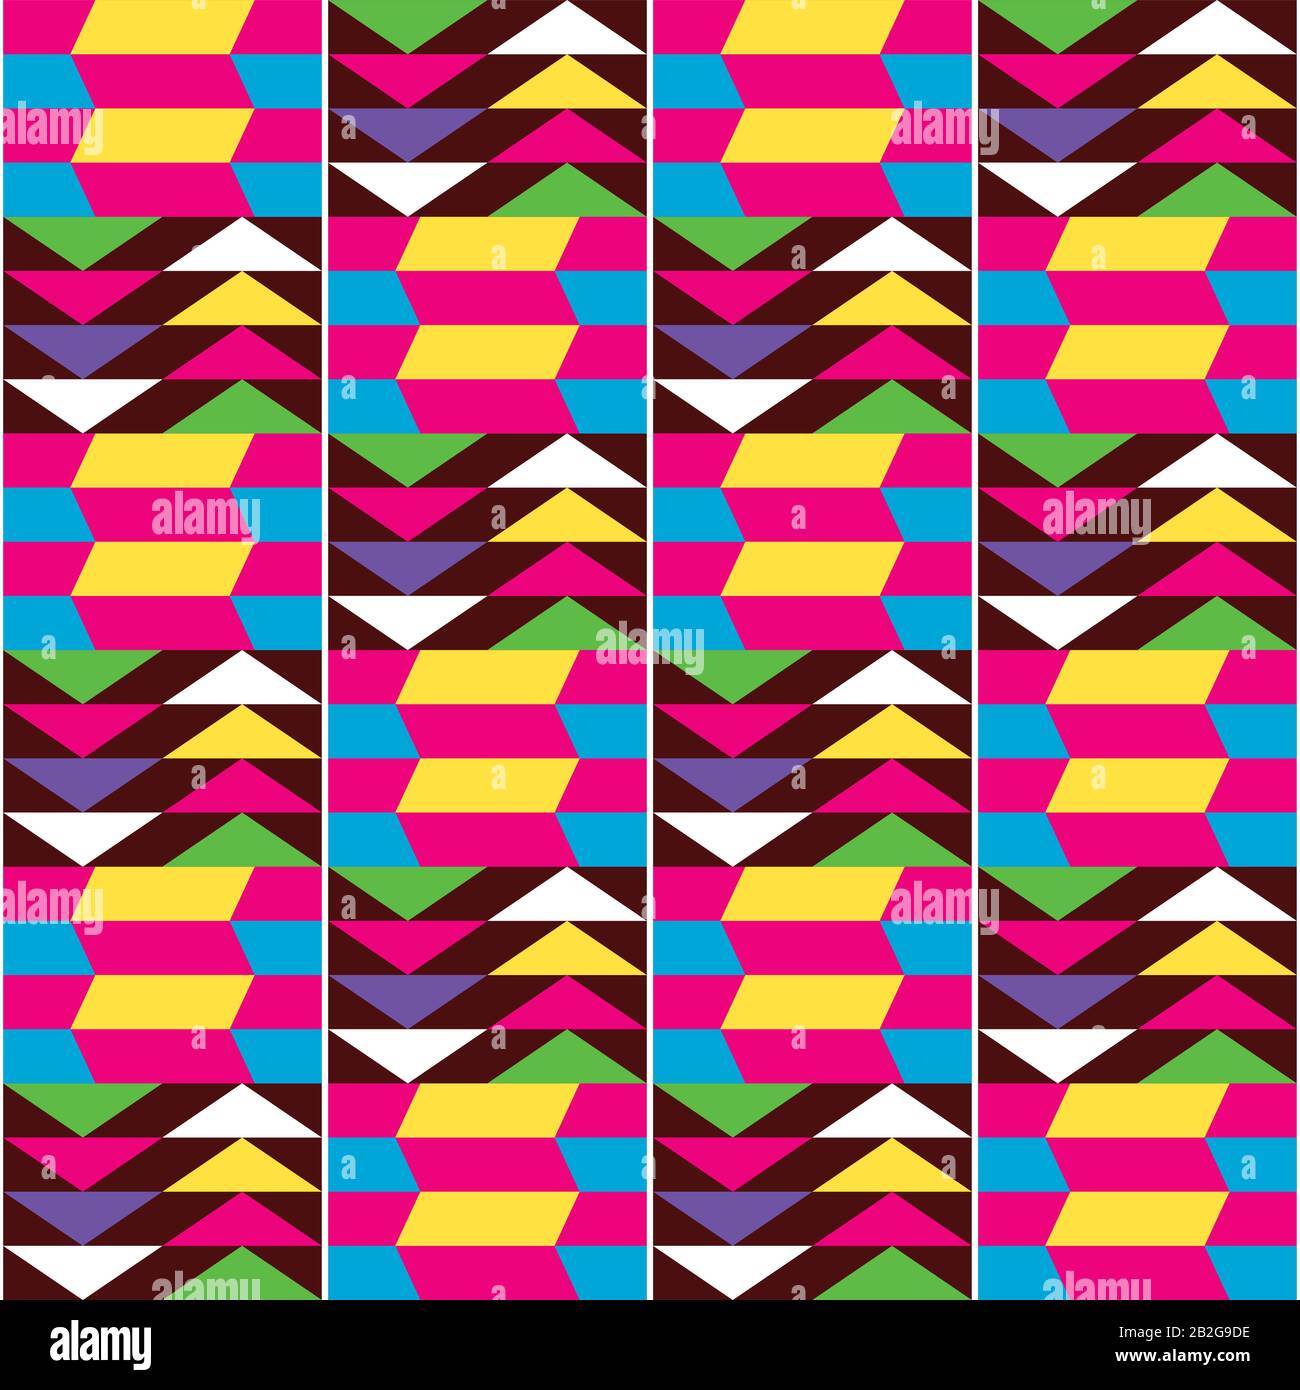 African Kente style vector seamless textile pattern, repetitive tribal design inspired by textiles from Africa Stock Vector